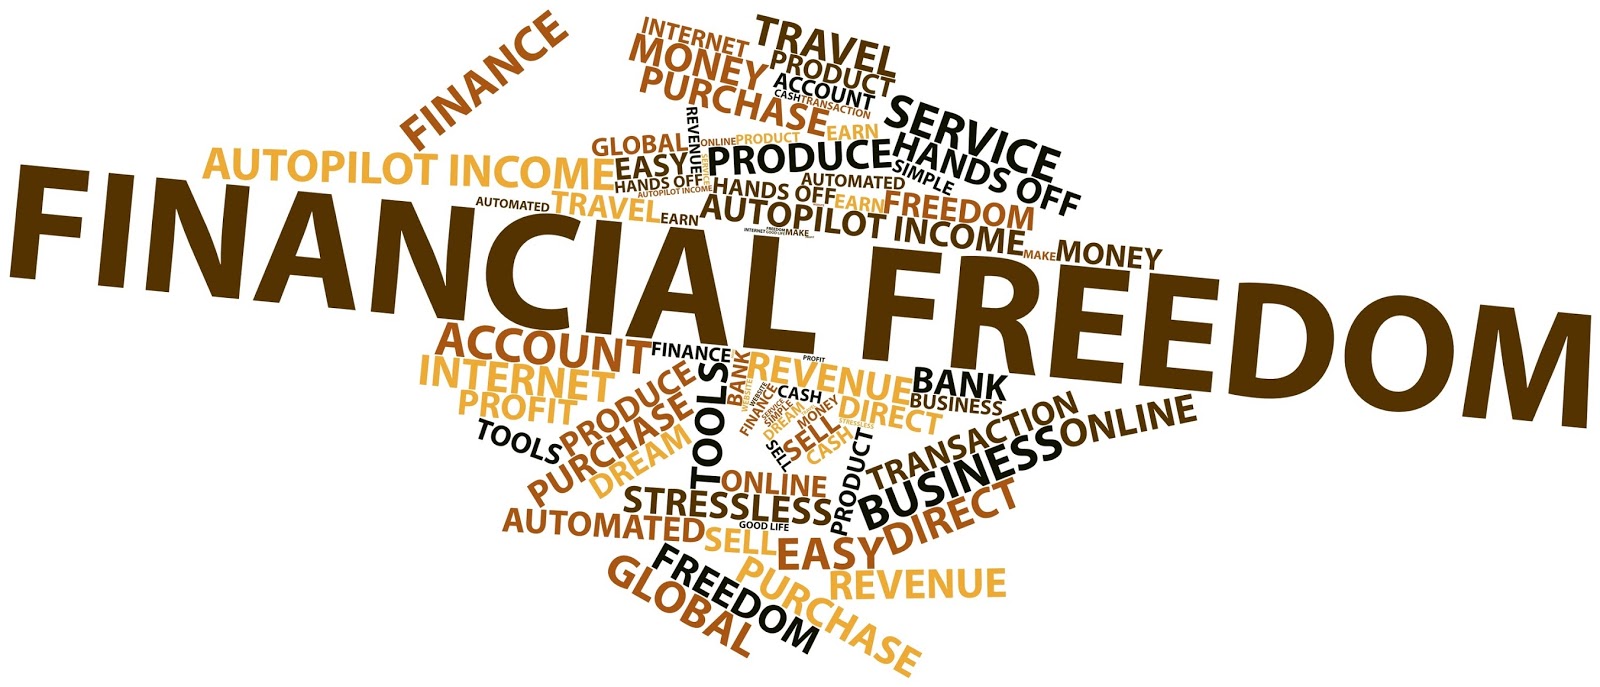 my cloud of thoughts: 6 Key Goals to Achieve Financial Freedom by Shane See